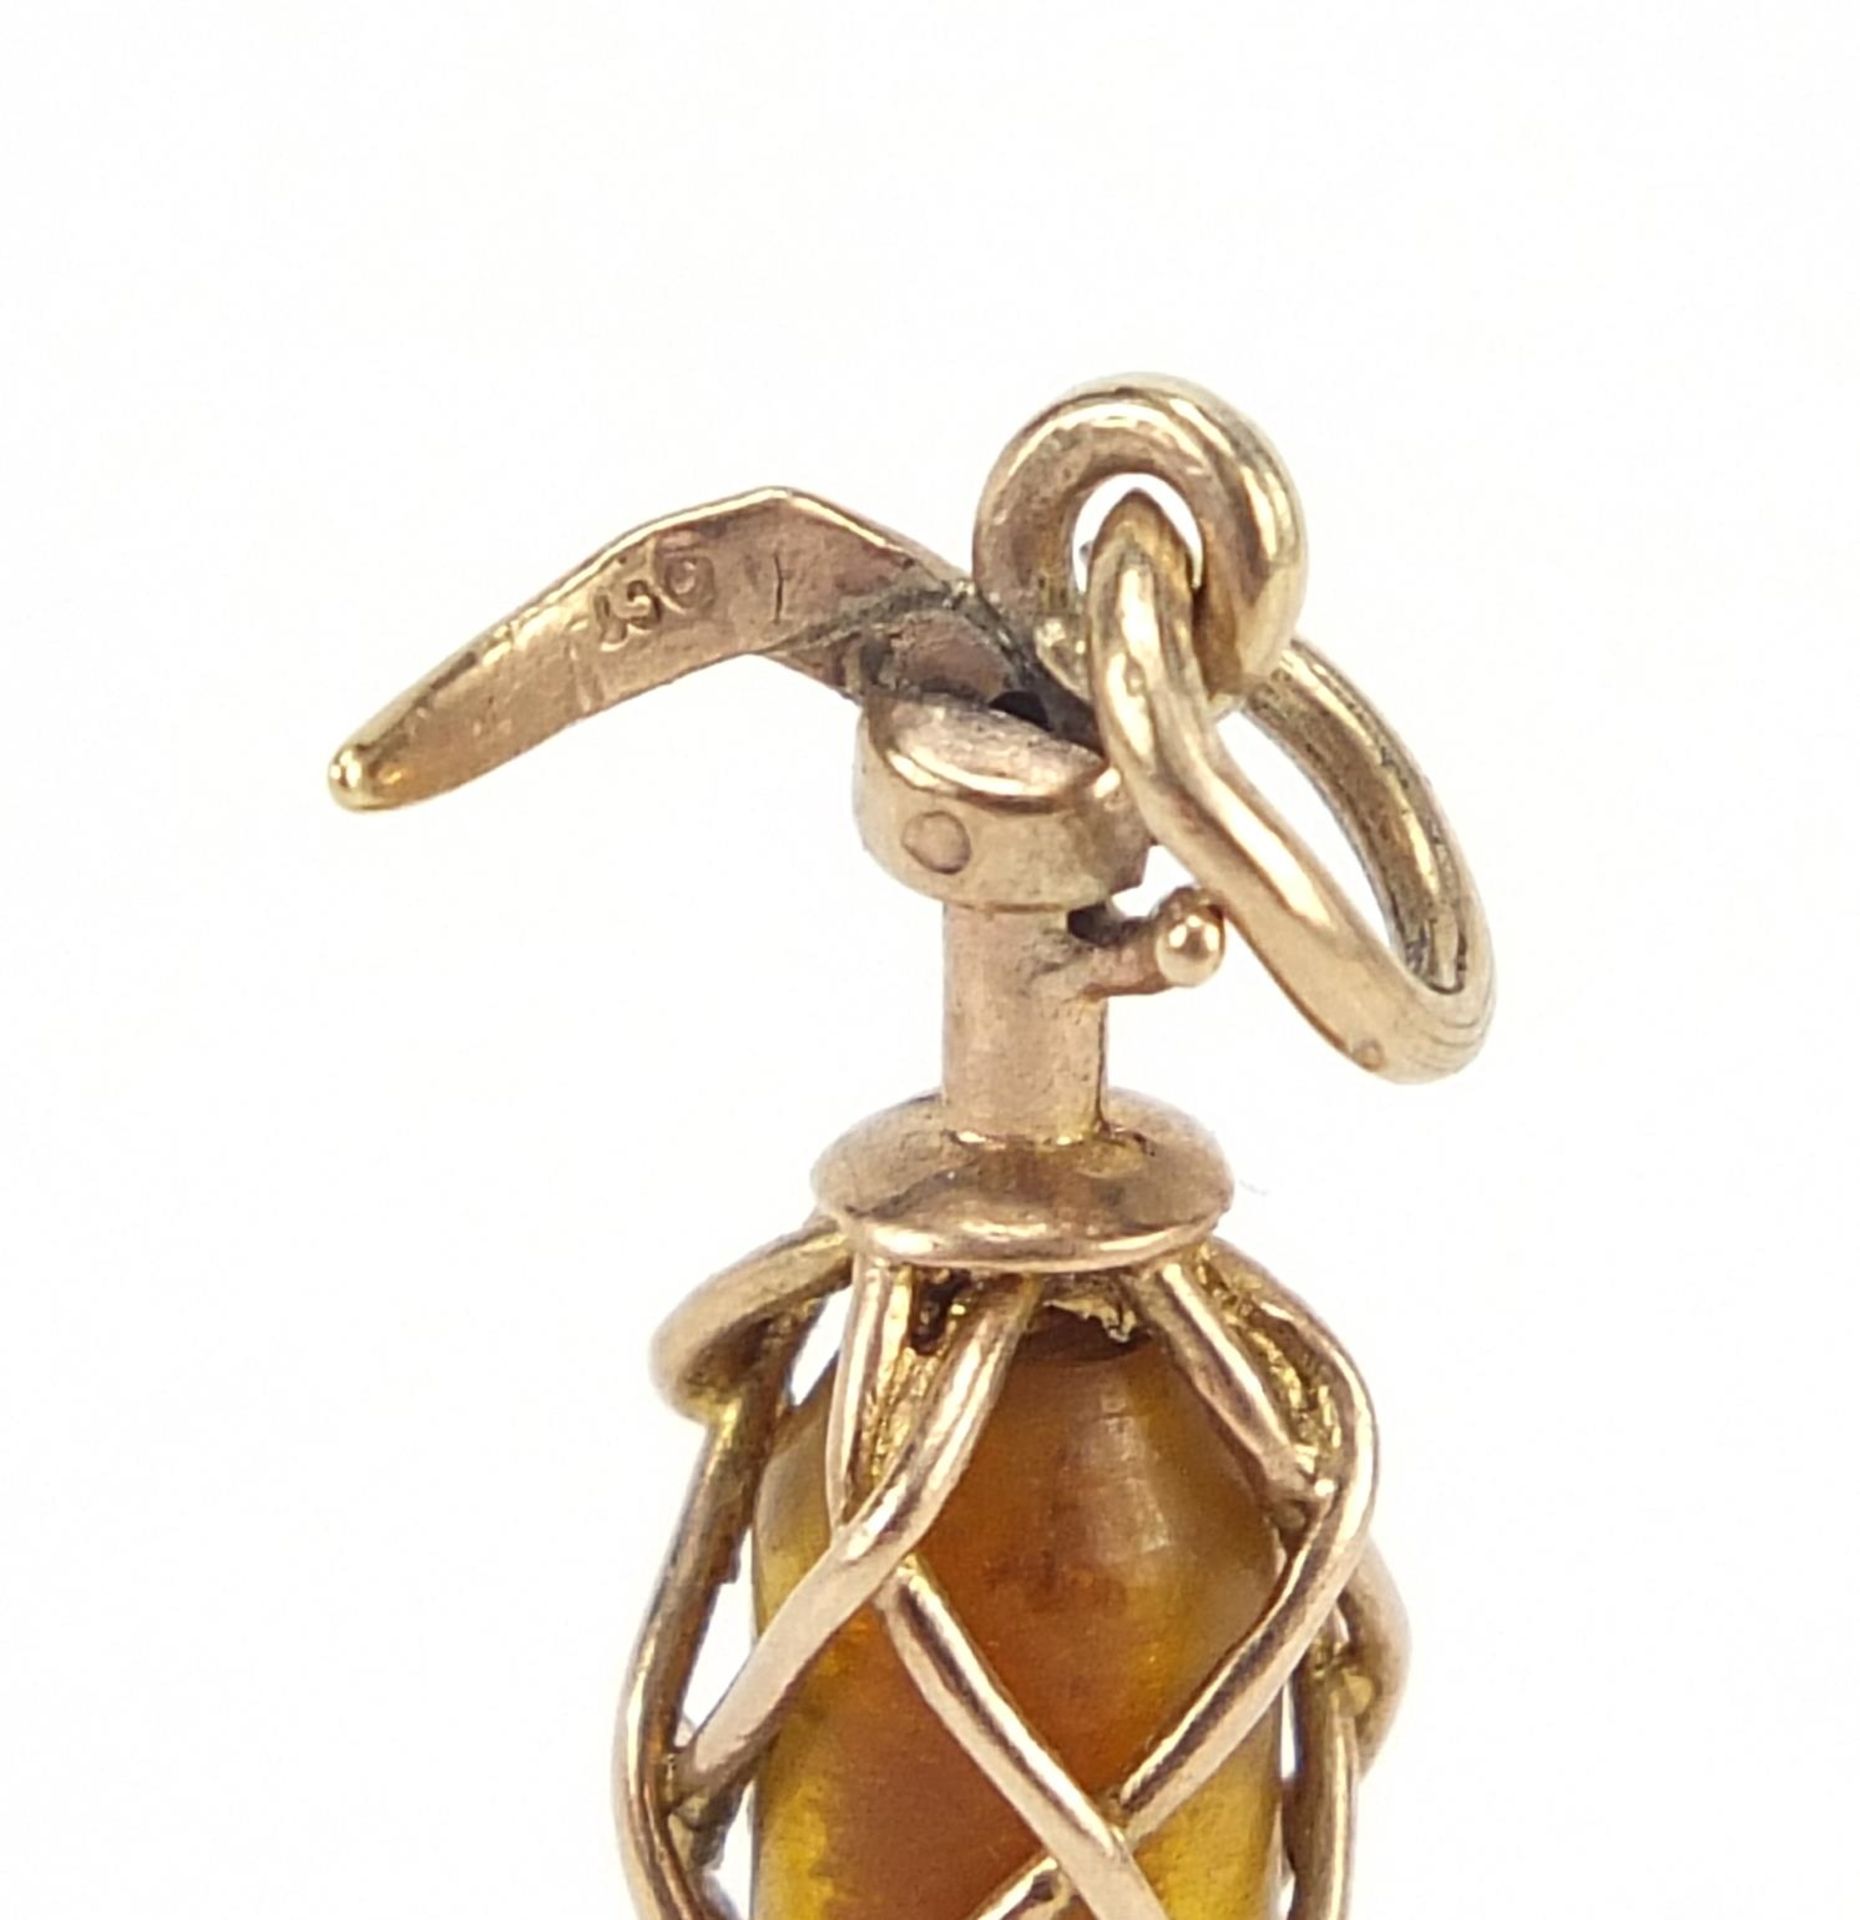 9ct gold soda syphon charm, 2.6cm high, 1.6g - Image 8 of 8